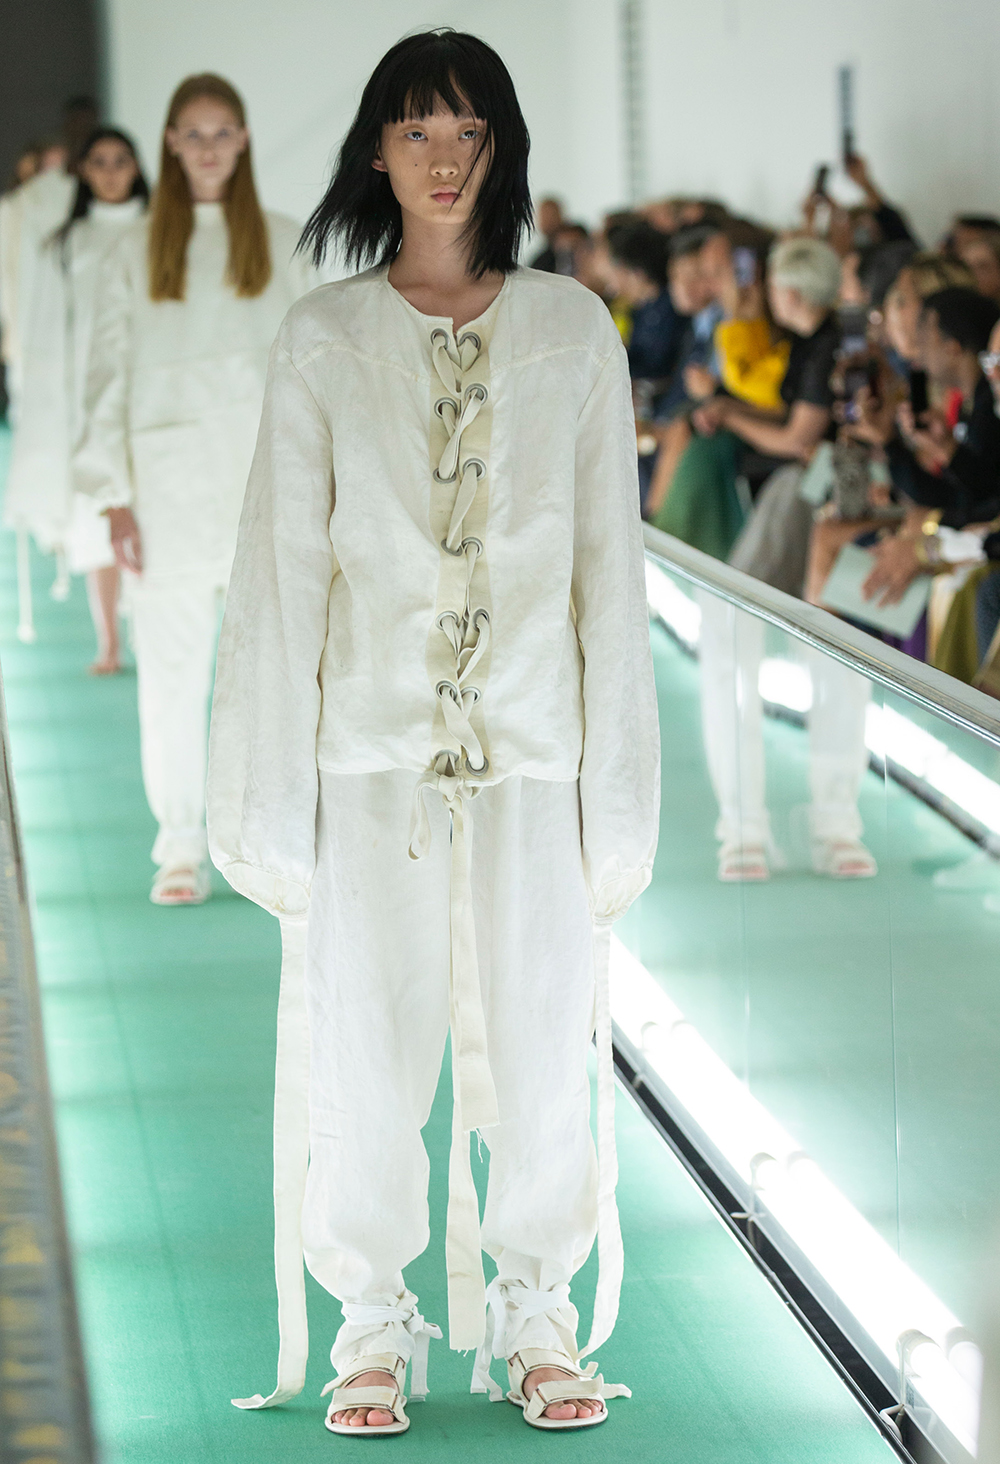 Gucci's Sustainable Spring/Summer 2020 Collection | S/ magazine